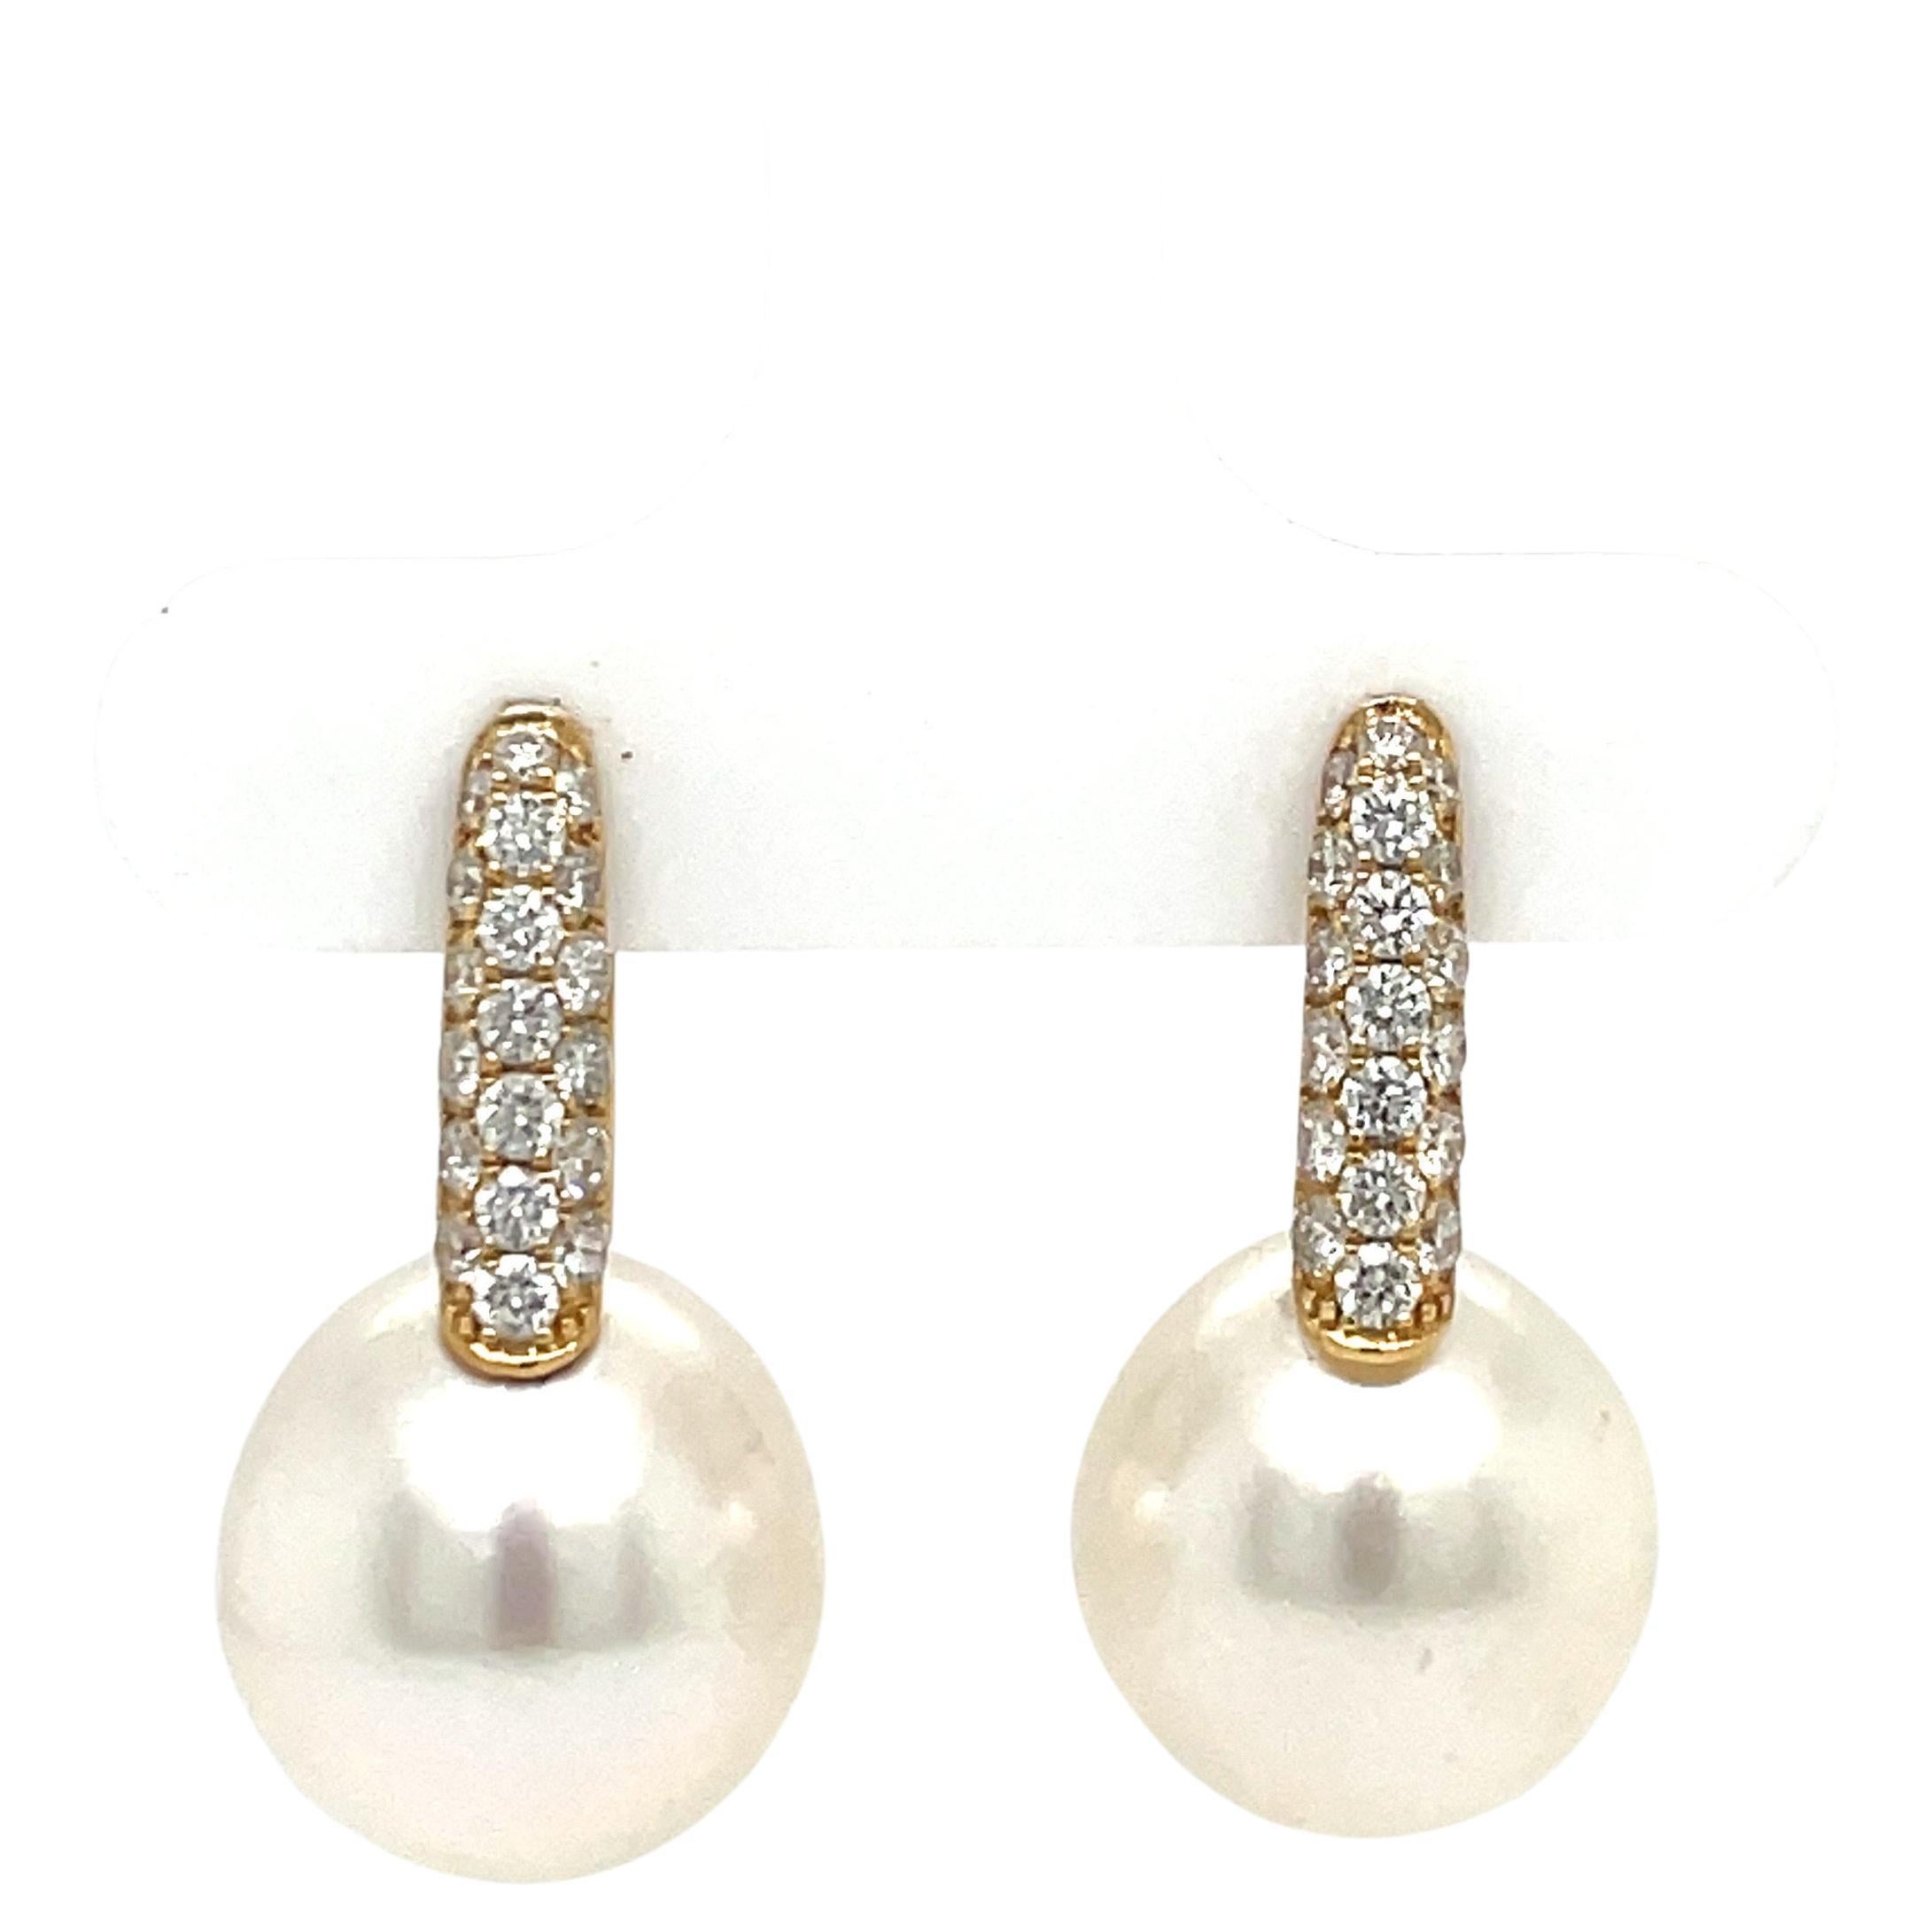 18 Karat Yellow Gold drop earrings featuring 38 round brilliants weighing 0.61 carats and two South Sea Pearls measuring 12-13 MM.
Color G-H
Clarity SI

Earrings available in different gold colors and pearls. 
DM for more information & pictures. 